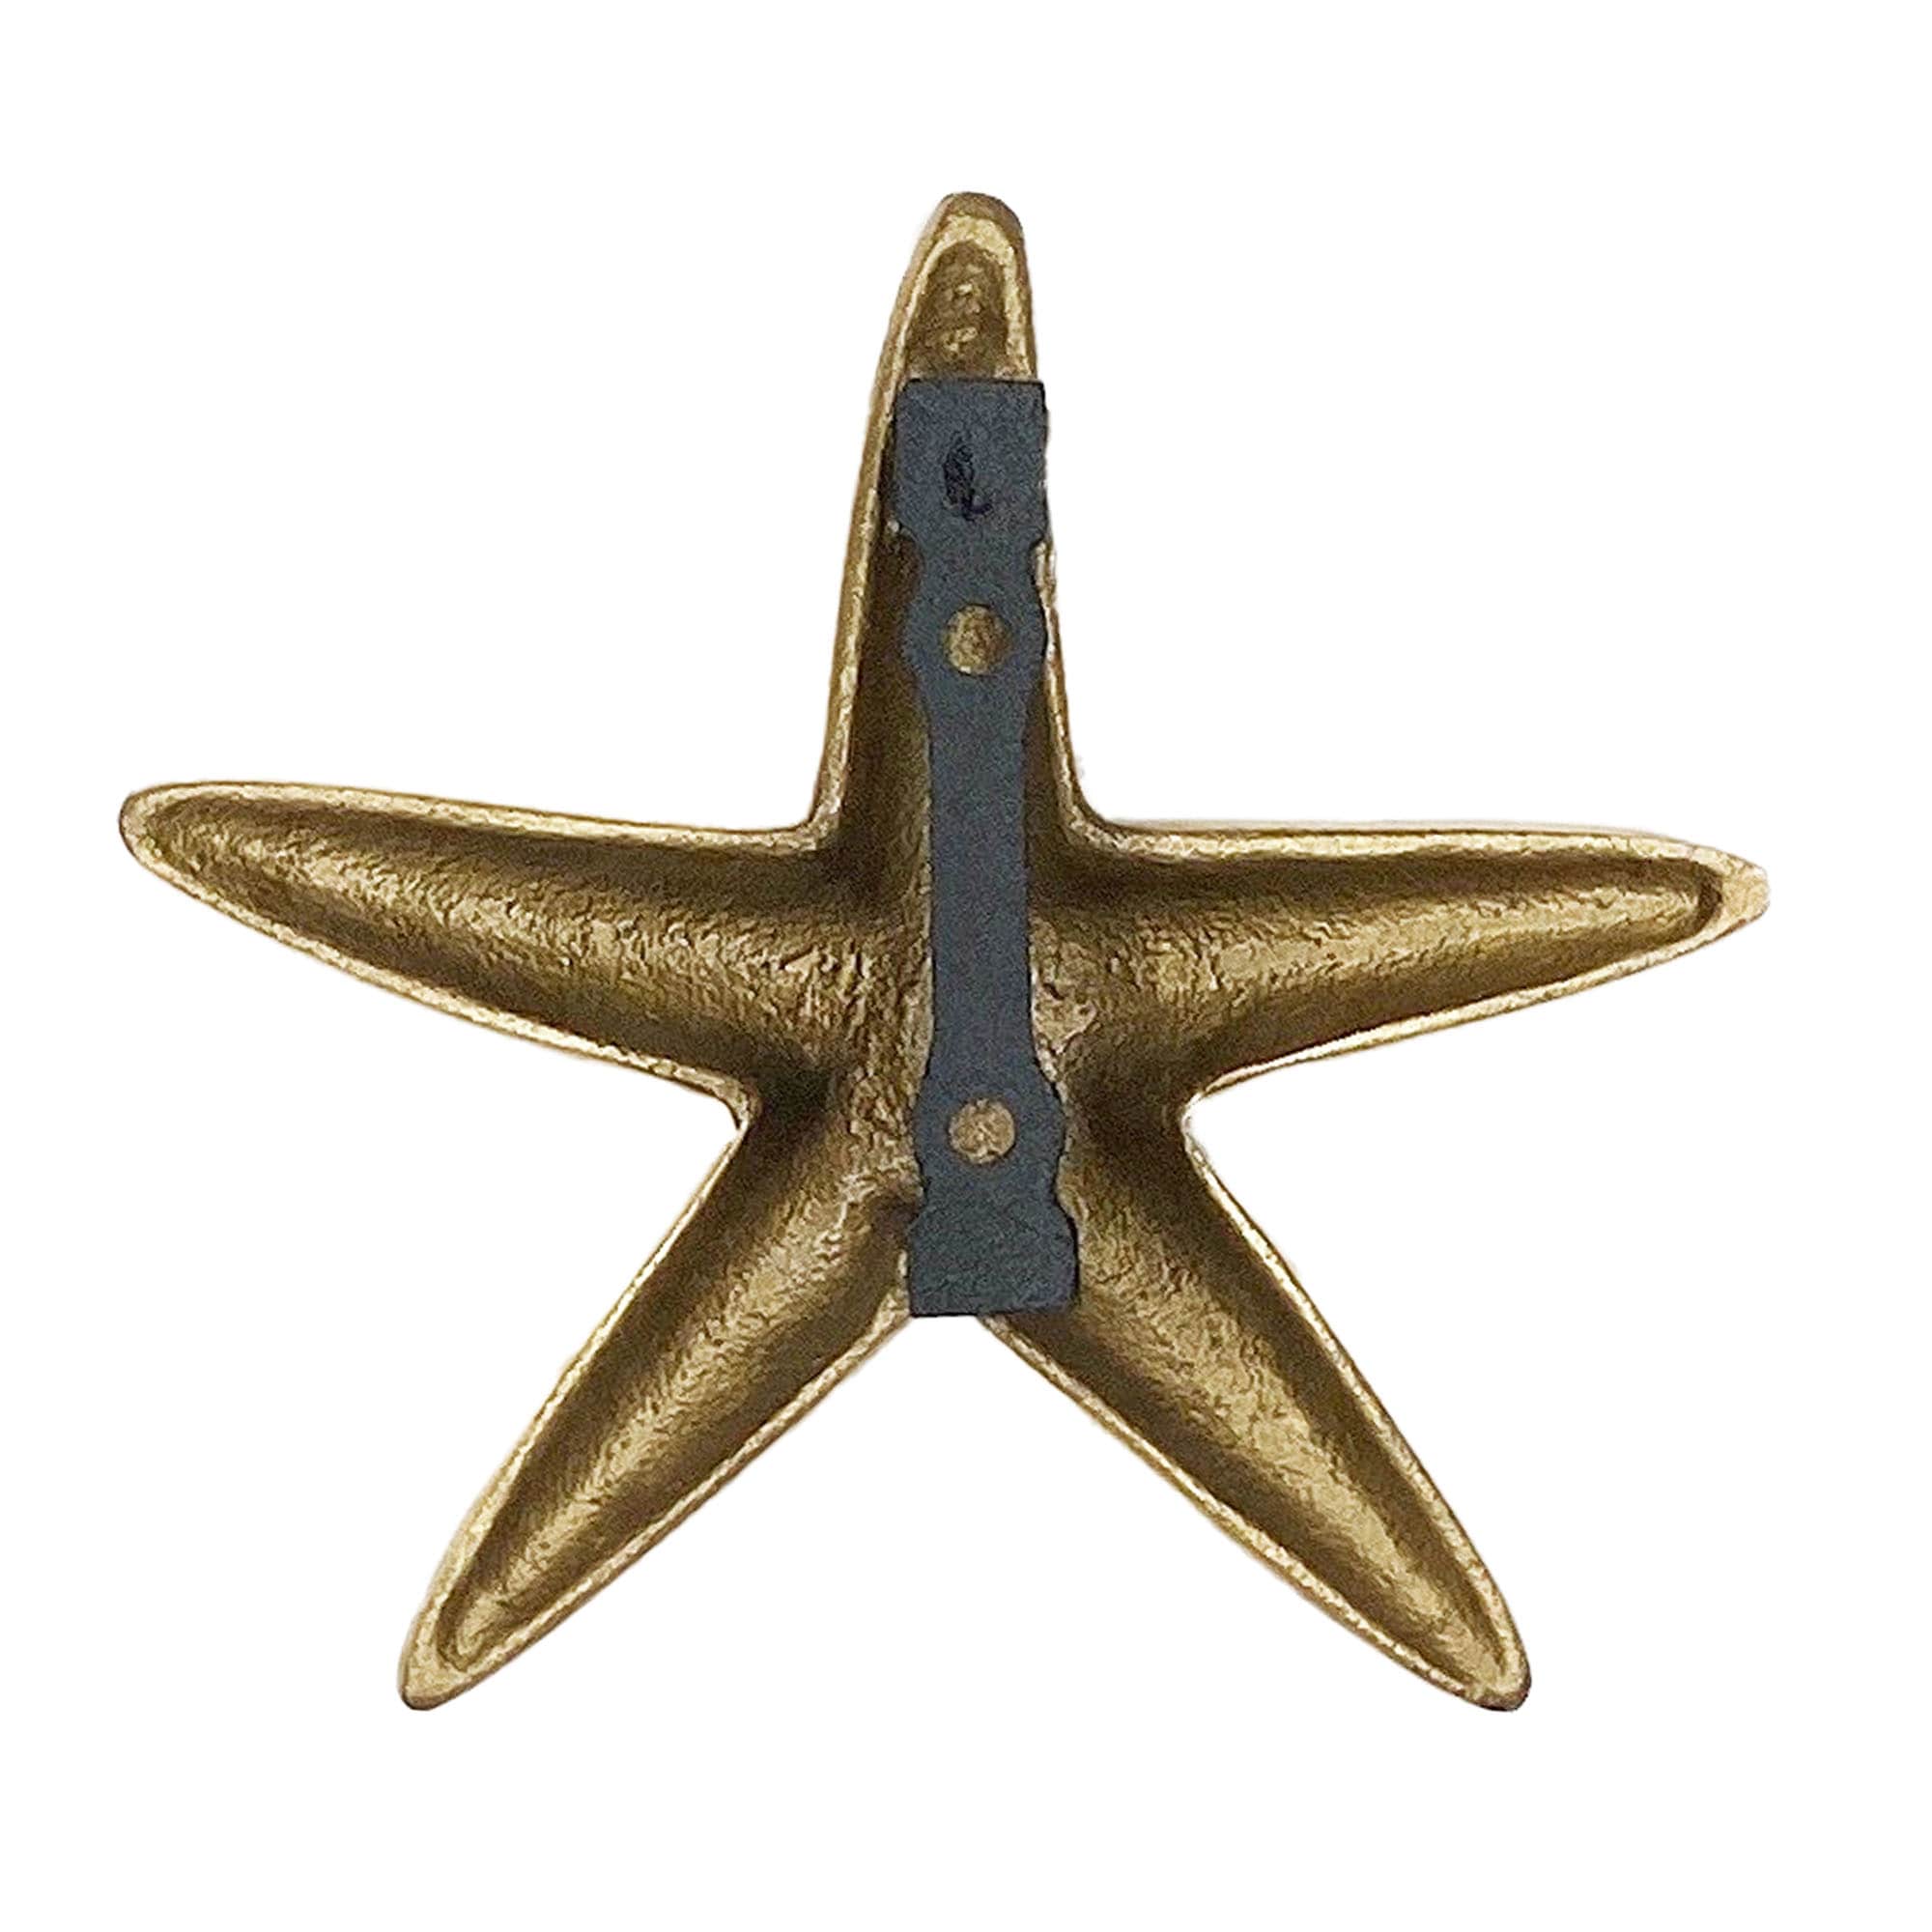 Michael Healy Solid Brass Starfish Door Knocker in Polished Finish, 4-1/4-in Length, Easy Installation, Screws Included